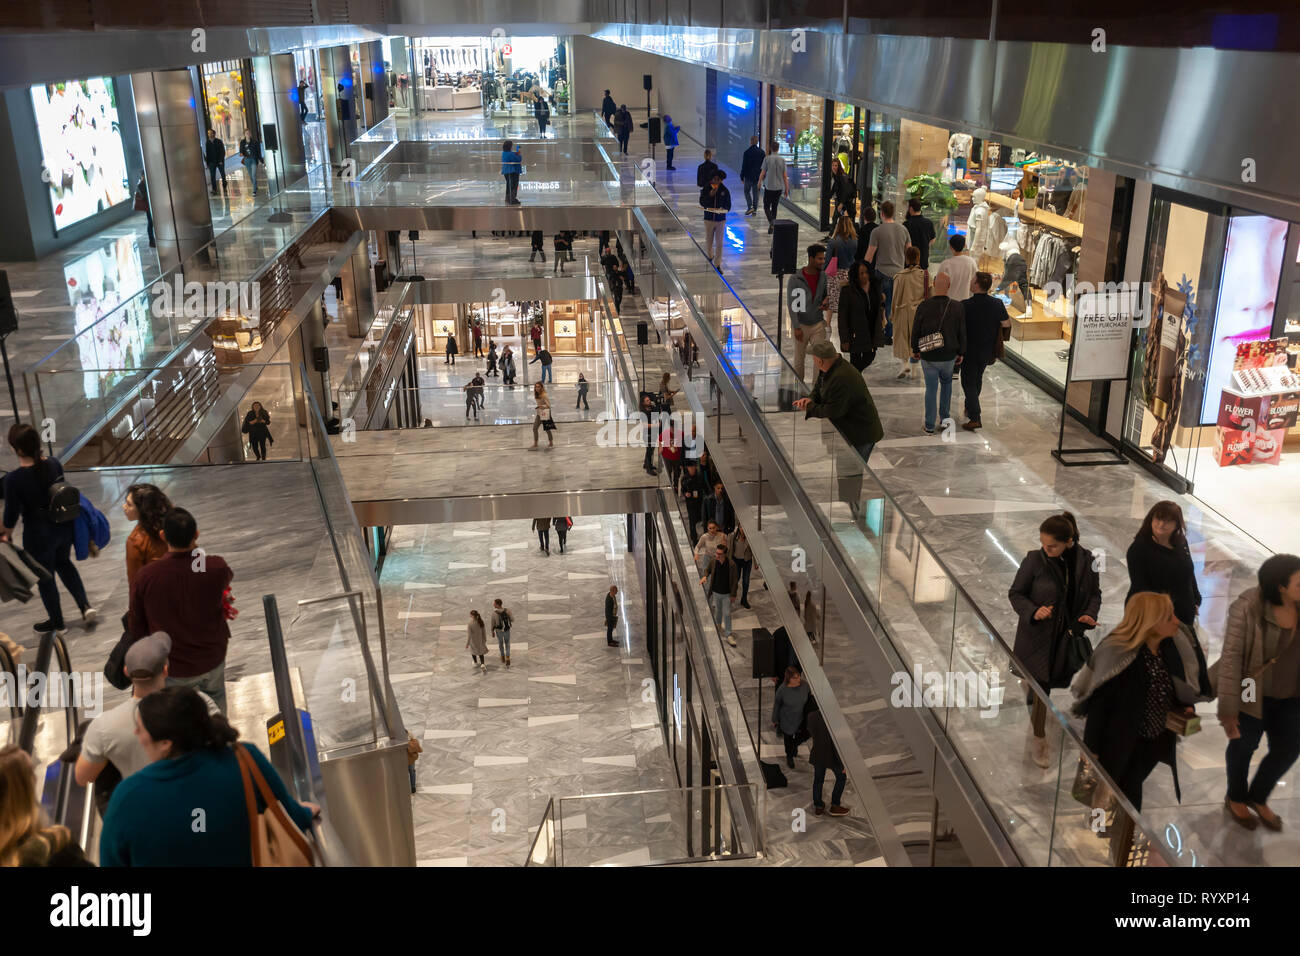 New York, USA. 15th Mar, 2019. Visitors crowd the Hudson Yards mall on the West Side of Manhattan on its grand opening day, Friday, March 15, 2019. Retailers, including the Neiman Marcus department store, opened their shops in the development which was built on a platform over the West Side railroad yards. Office, residential, public space and retail space comprise the first phase in what is arguably the most expensive construction project ever built in the U.S.   (© Richard B. Levine) Credit: Richard Levine/Alamy Live News Stock Photo